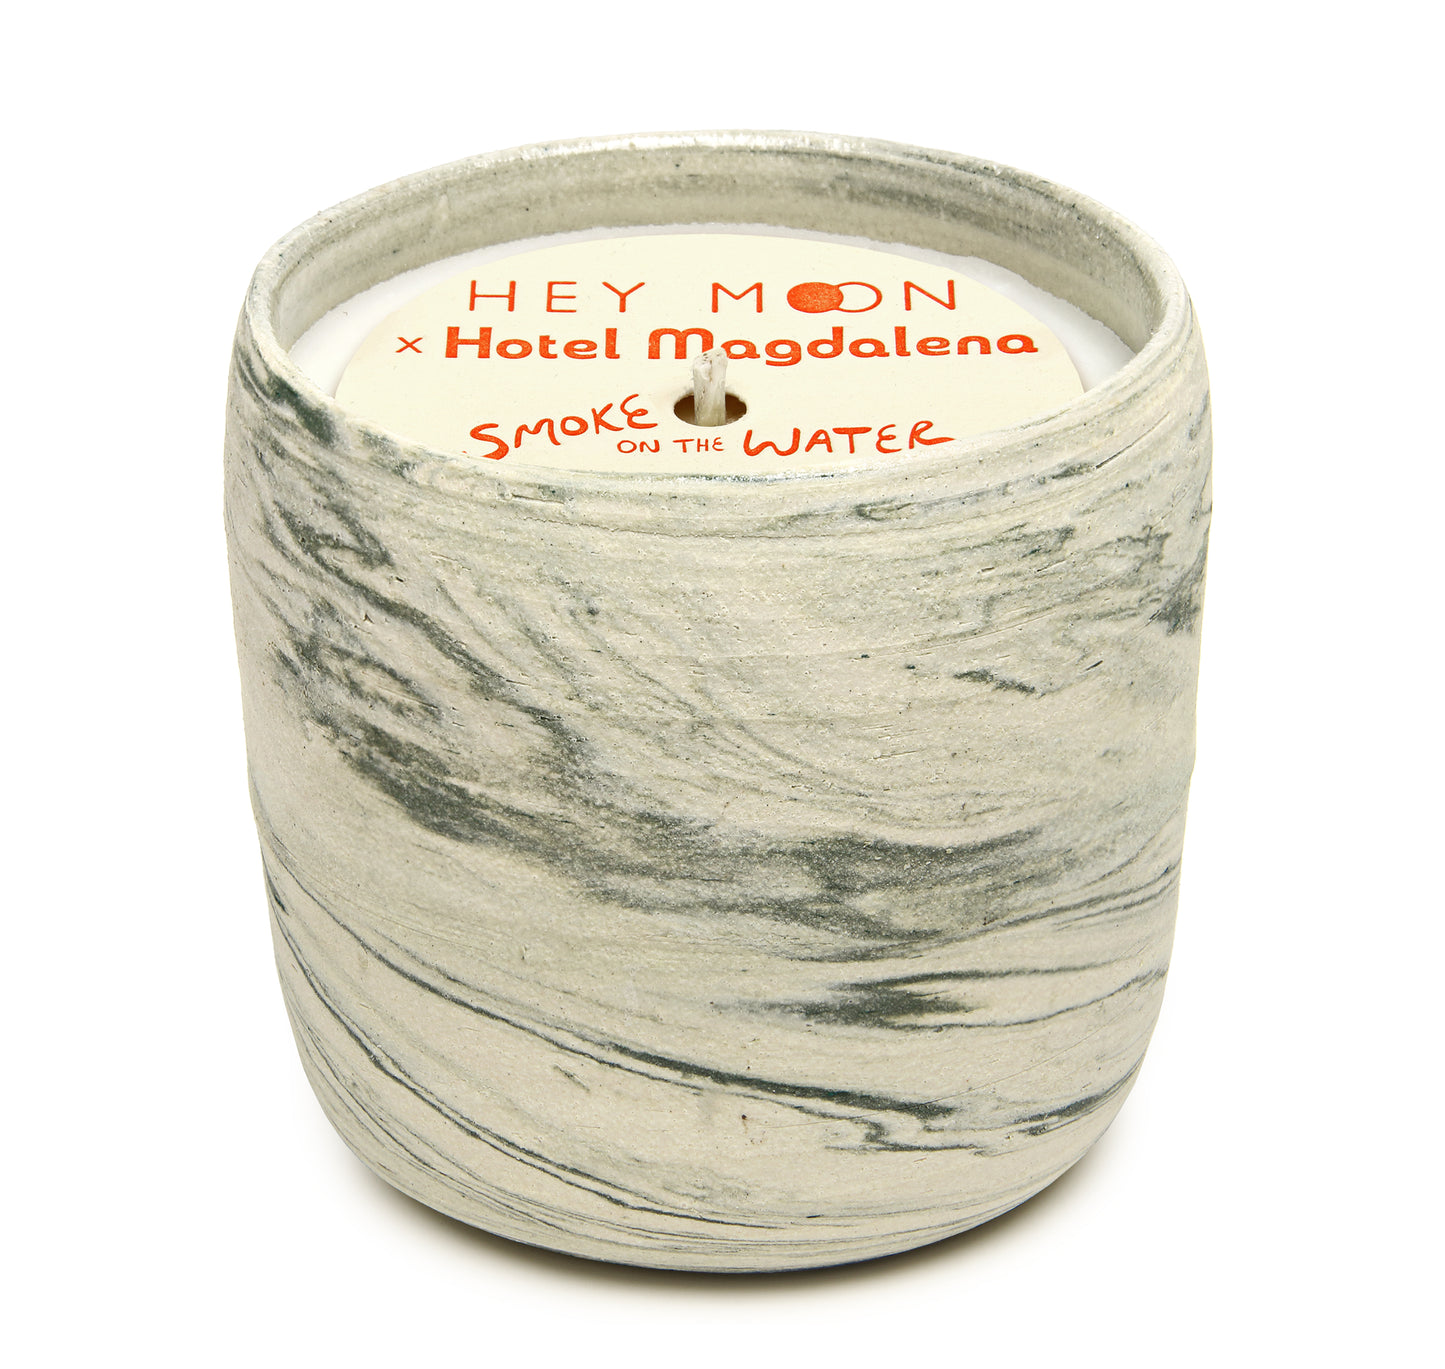 Hey Moon X Hotel Magdalena "Smoke on the Water" Candle